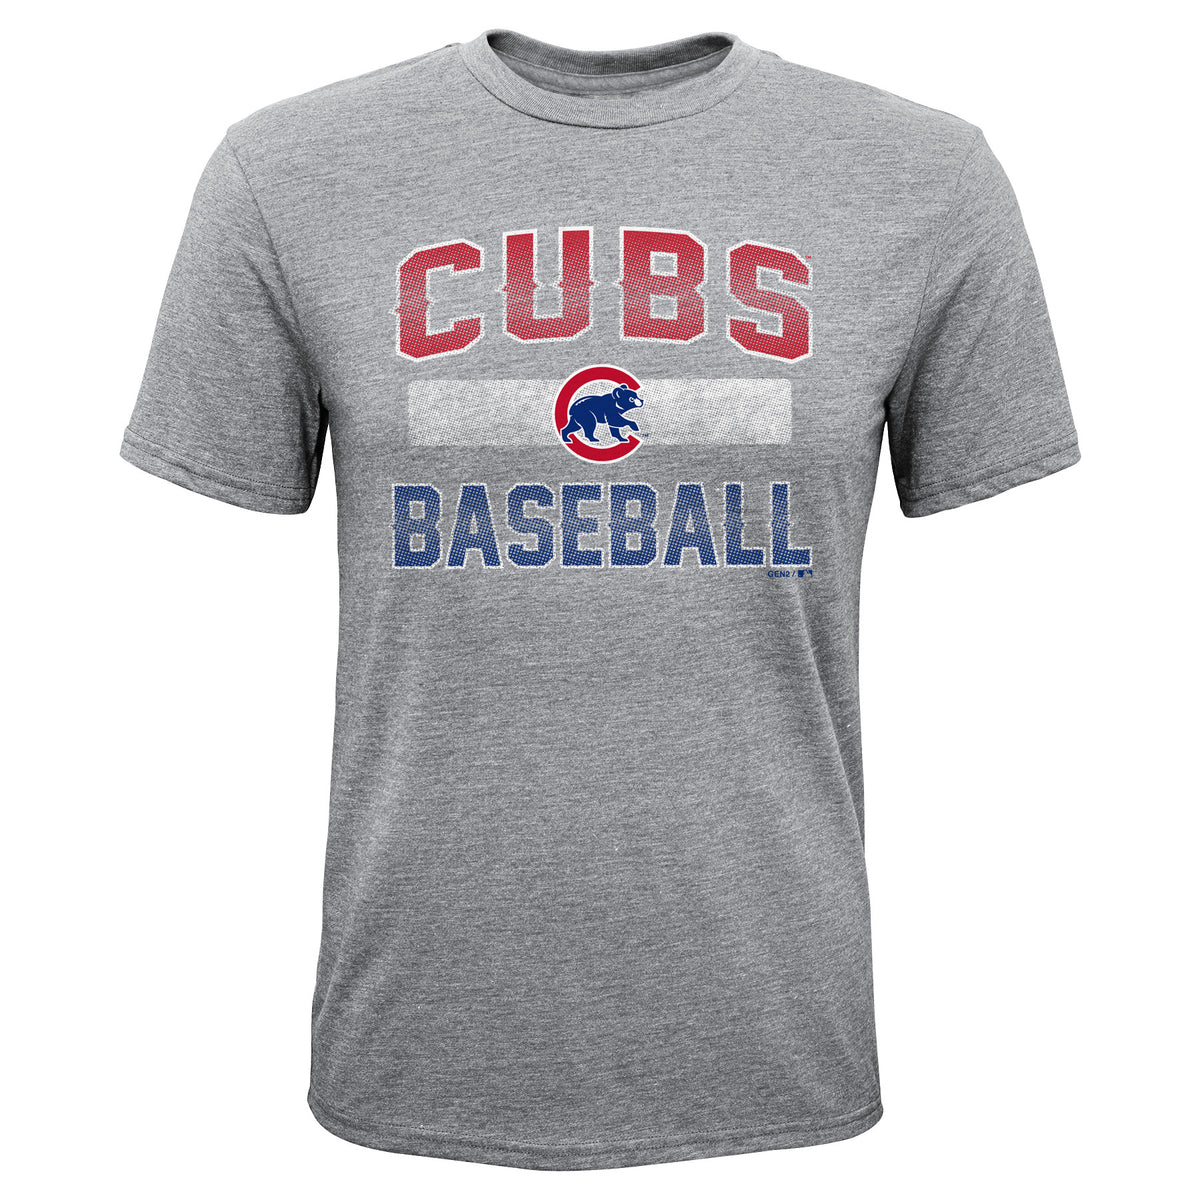 Chicago Cubs Youth Gray Hall of Fame T-Shirt Tee X-Large (18)